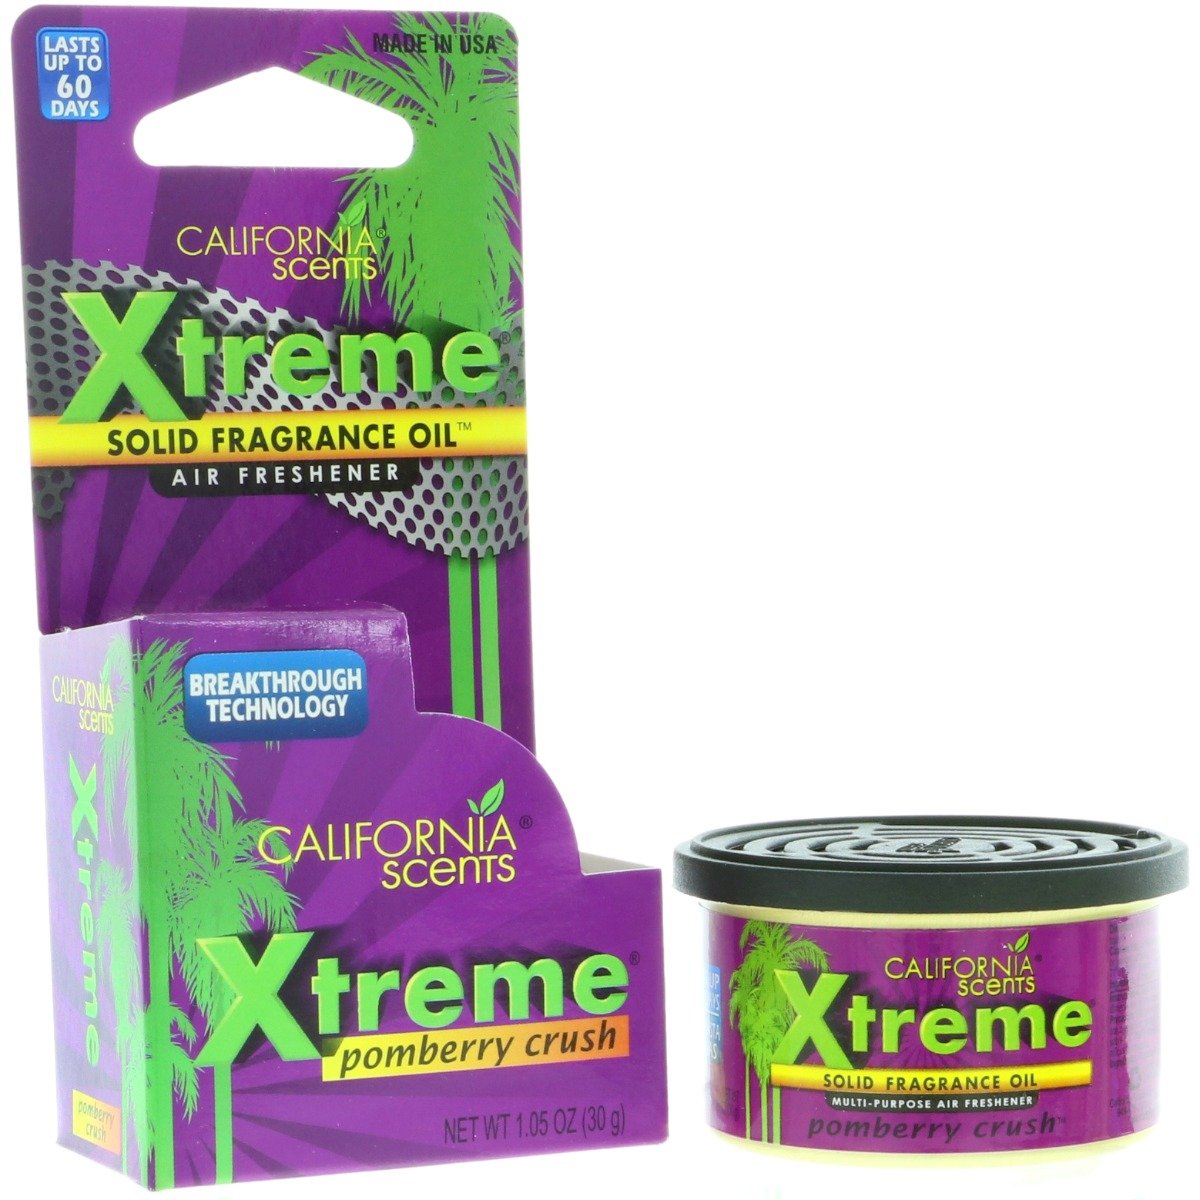 Xtreme Pomberry Crush